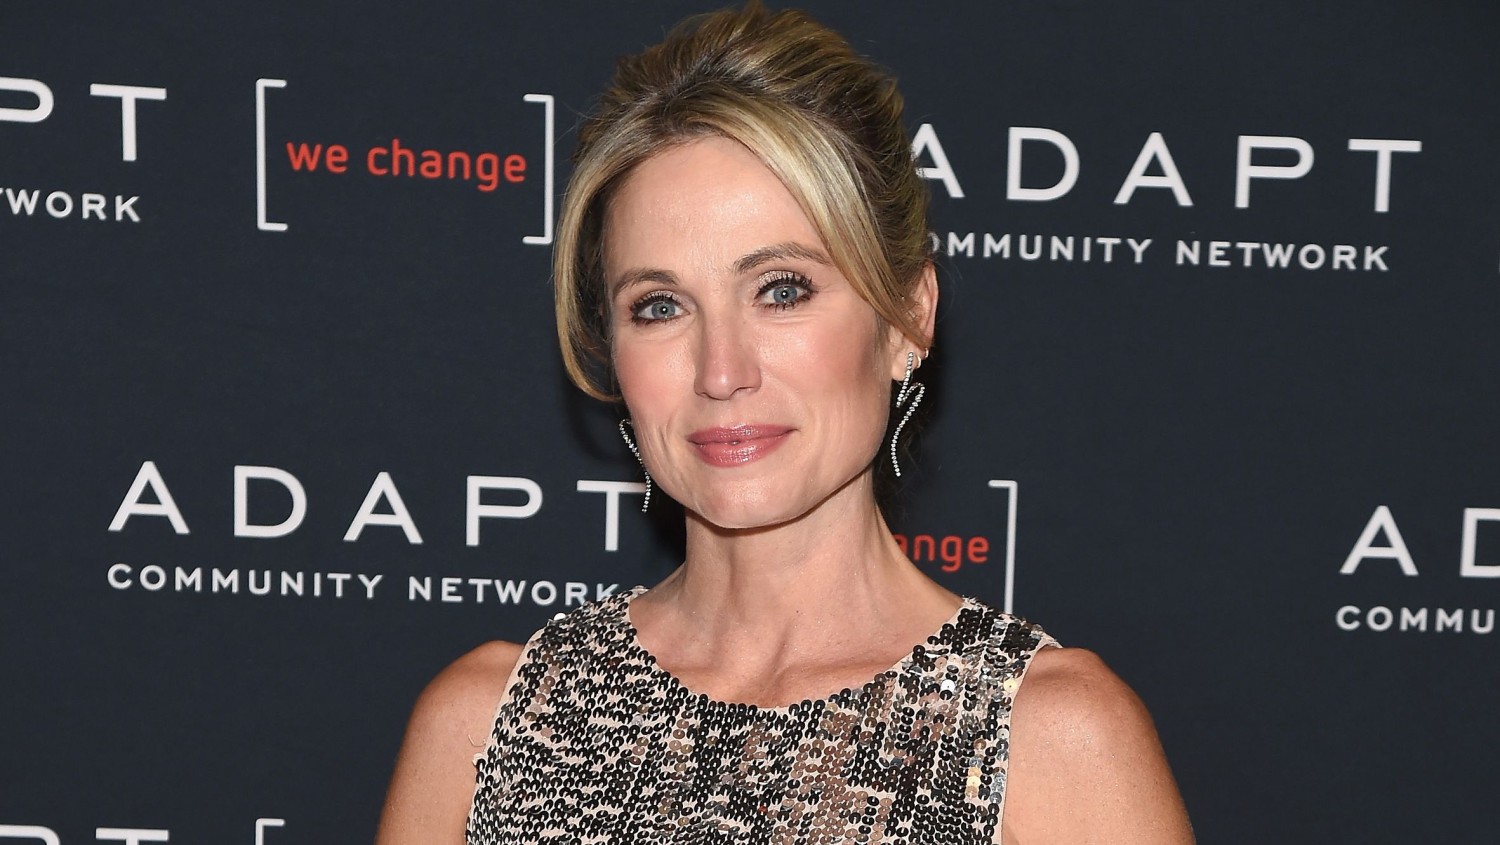 Amy Robach says she lost most of her ‘worldly possessions’ in her divorce from Andrew Shue